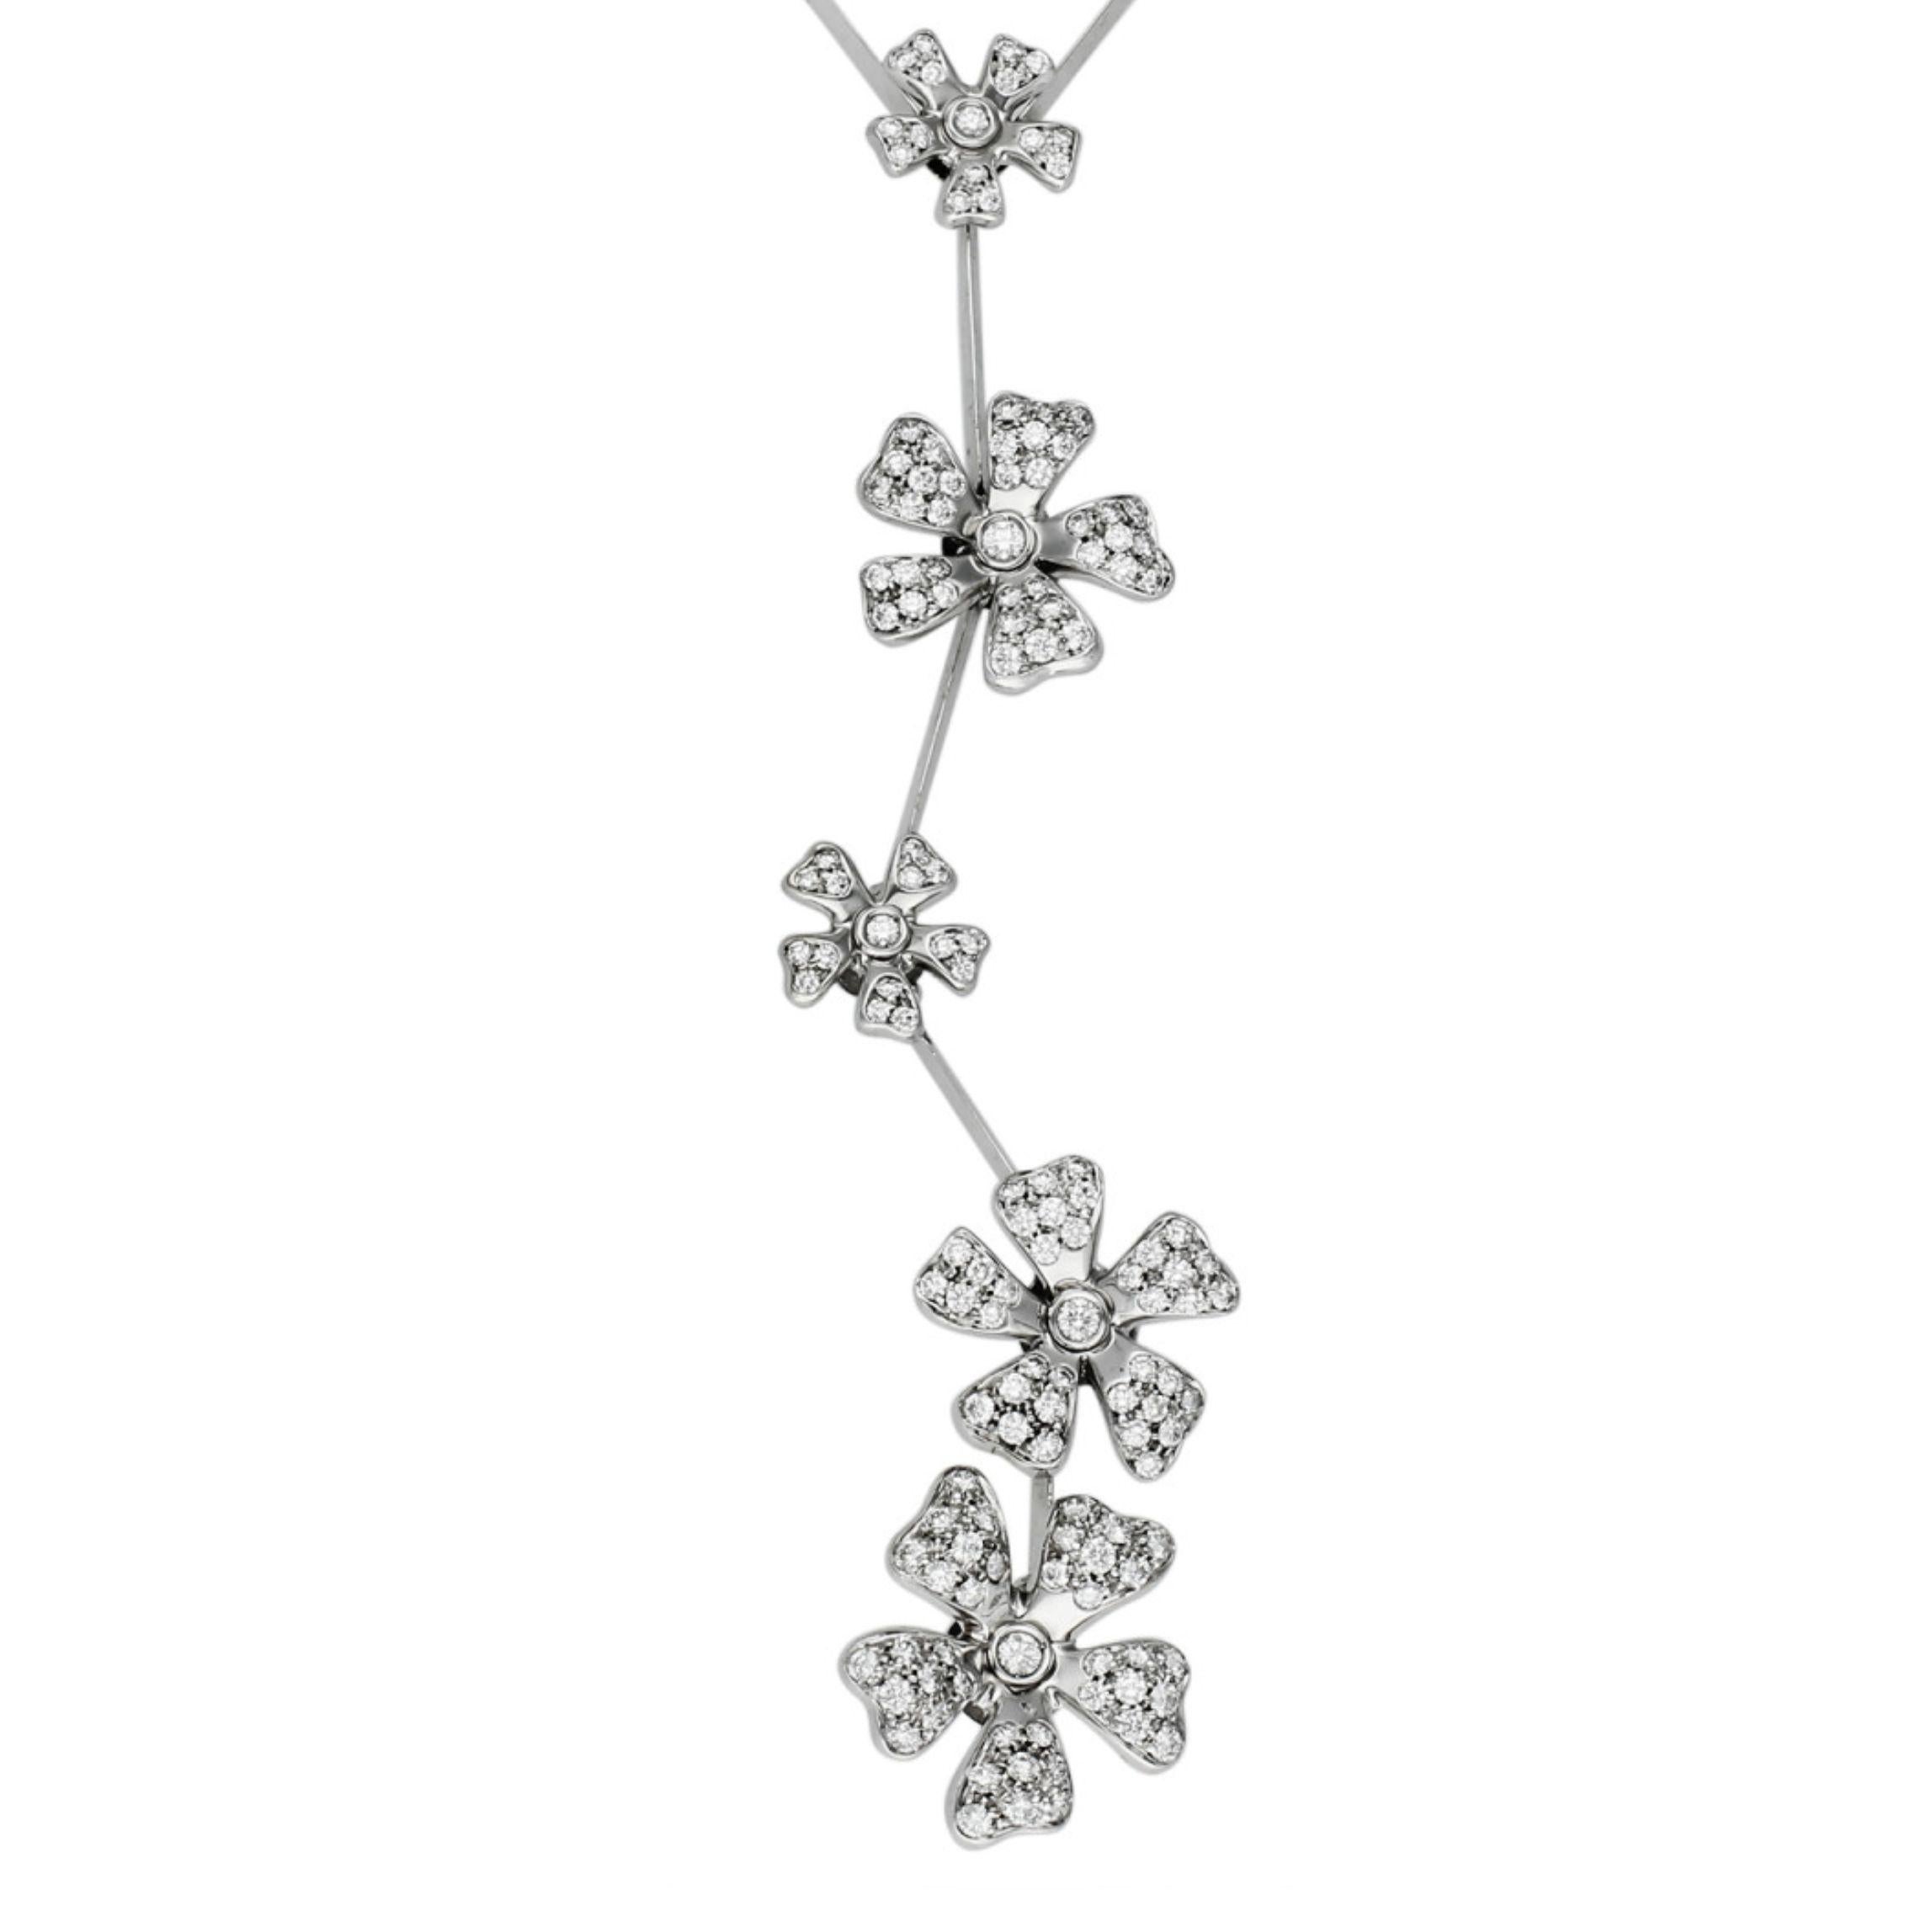 De Beers Wild Flower Necklace 2.10ct Diamond and 18ct White Gold

This Pre-Loved De Beers Wild Flower Necklace is an exquisite piece with an enchanting allure. A symphony of luxury and nature, featuring a cascade of meticulously crafted